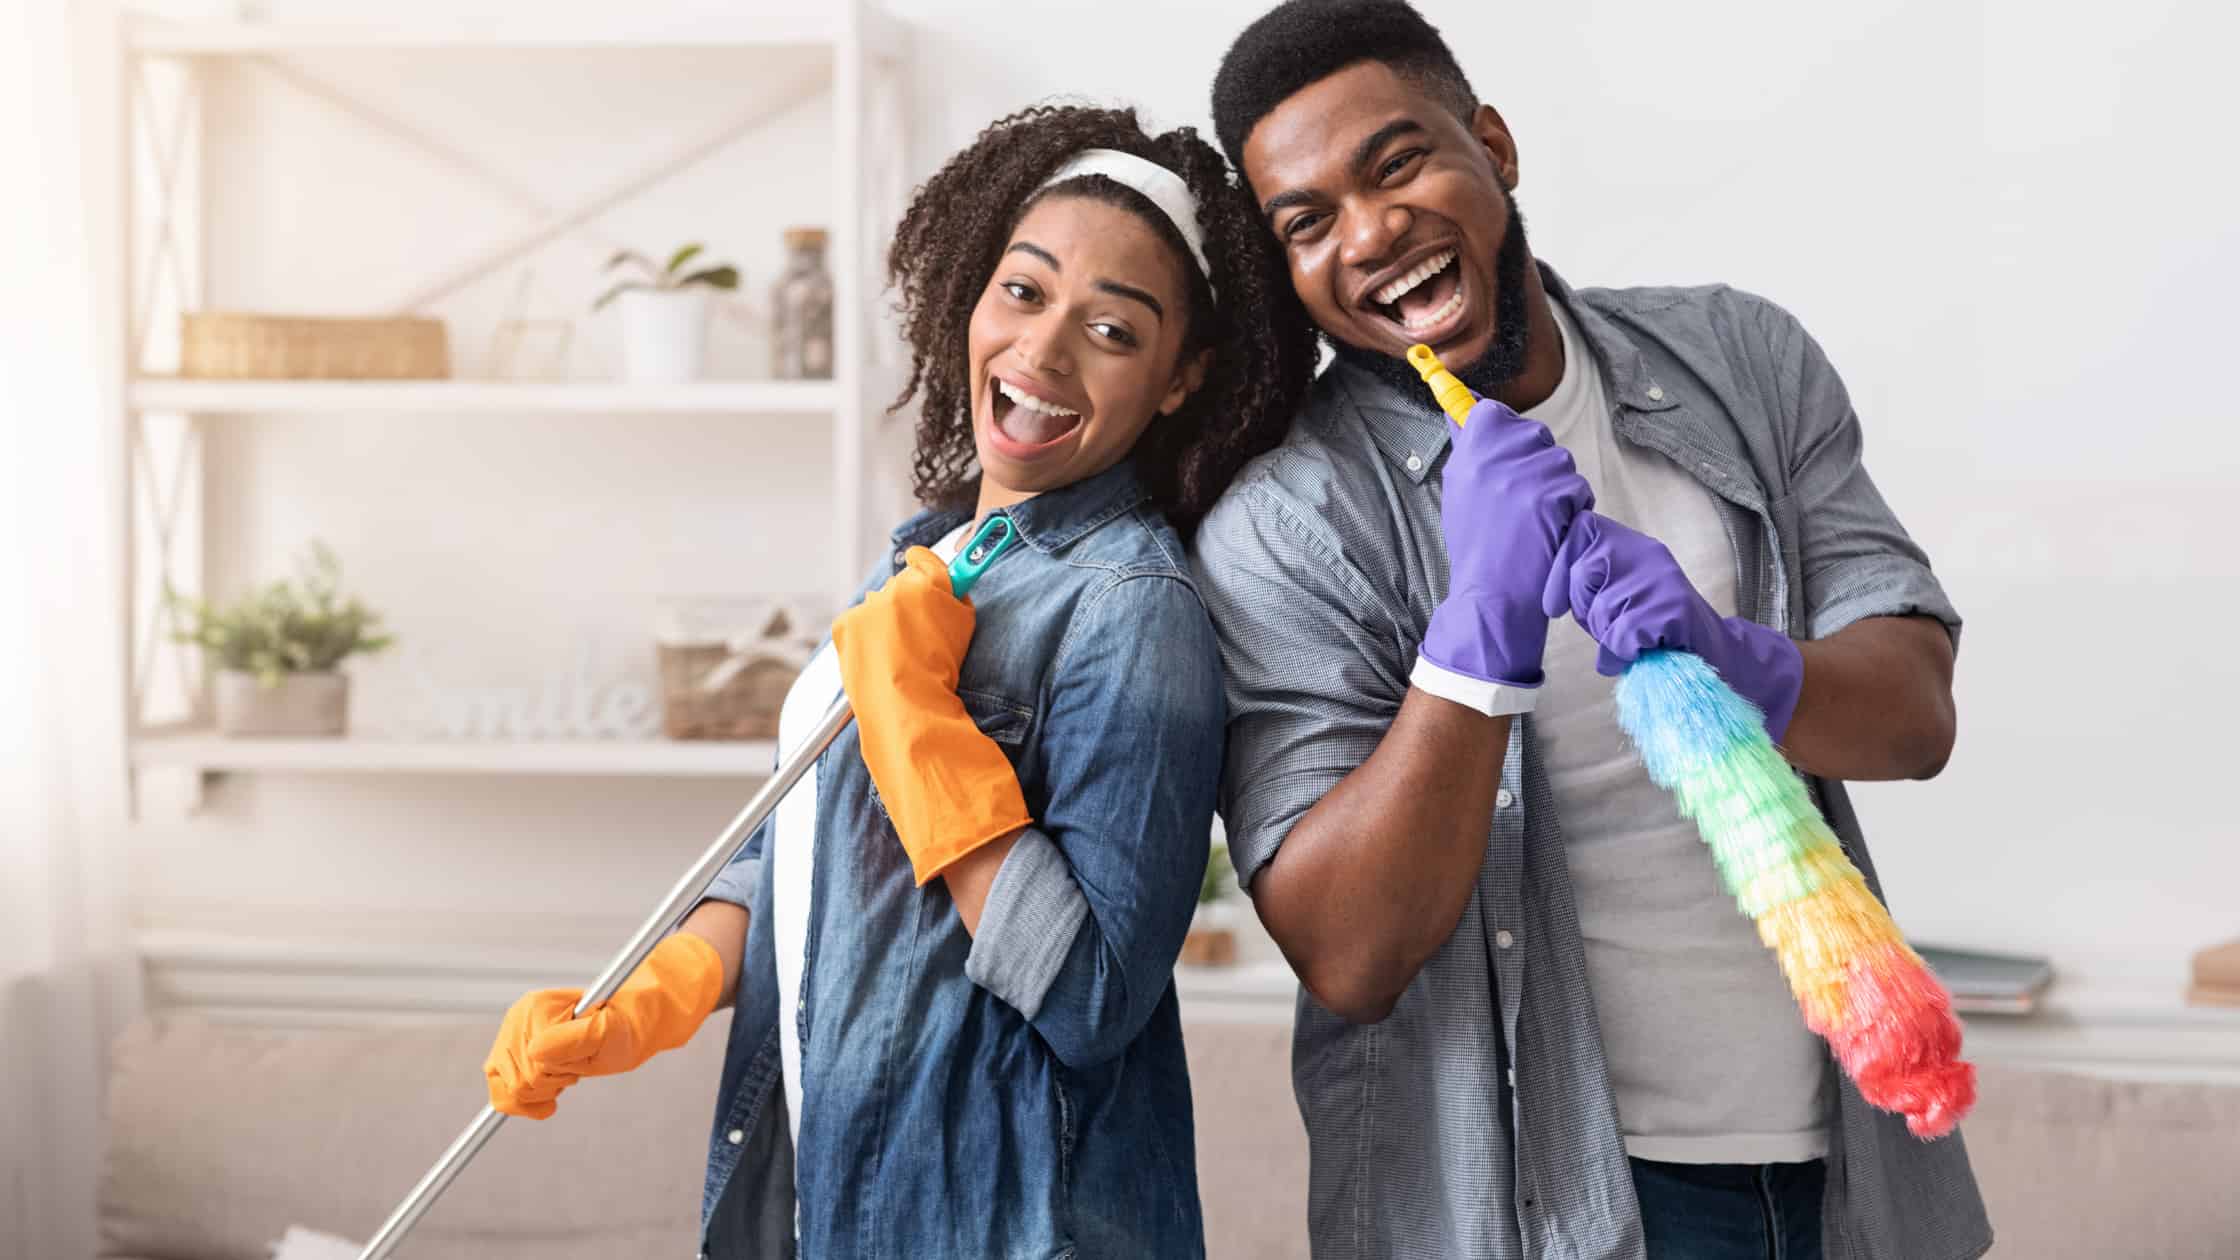 Mobile home cleaning checklist, couple smile after cleaning their mobile home.